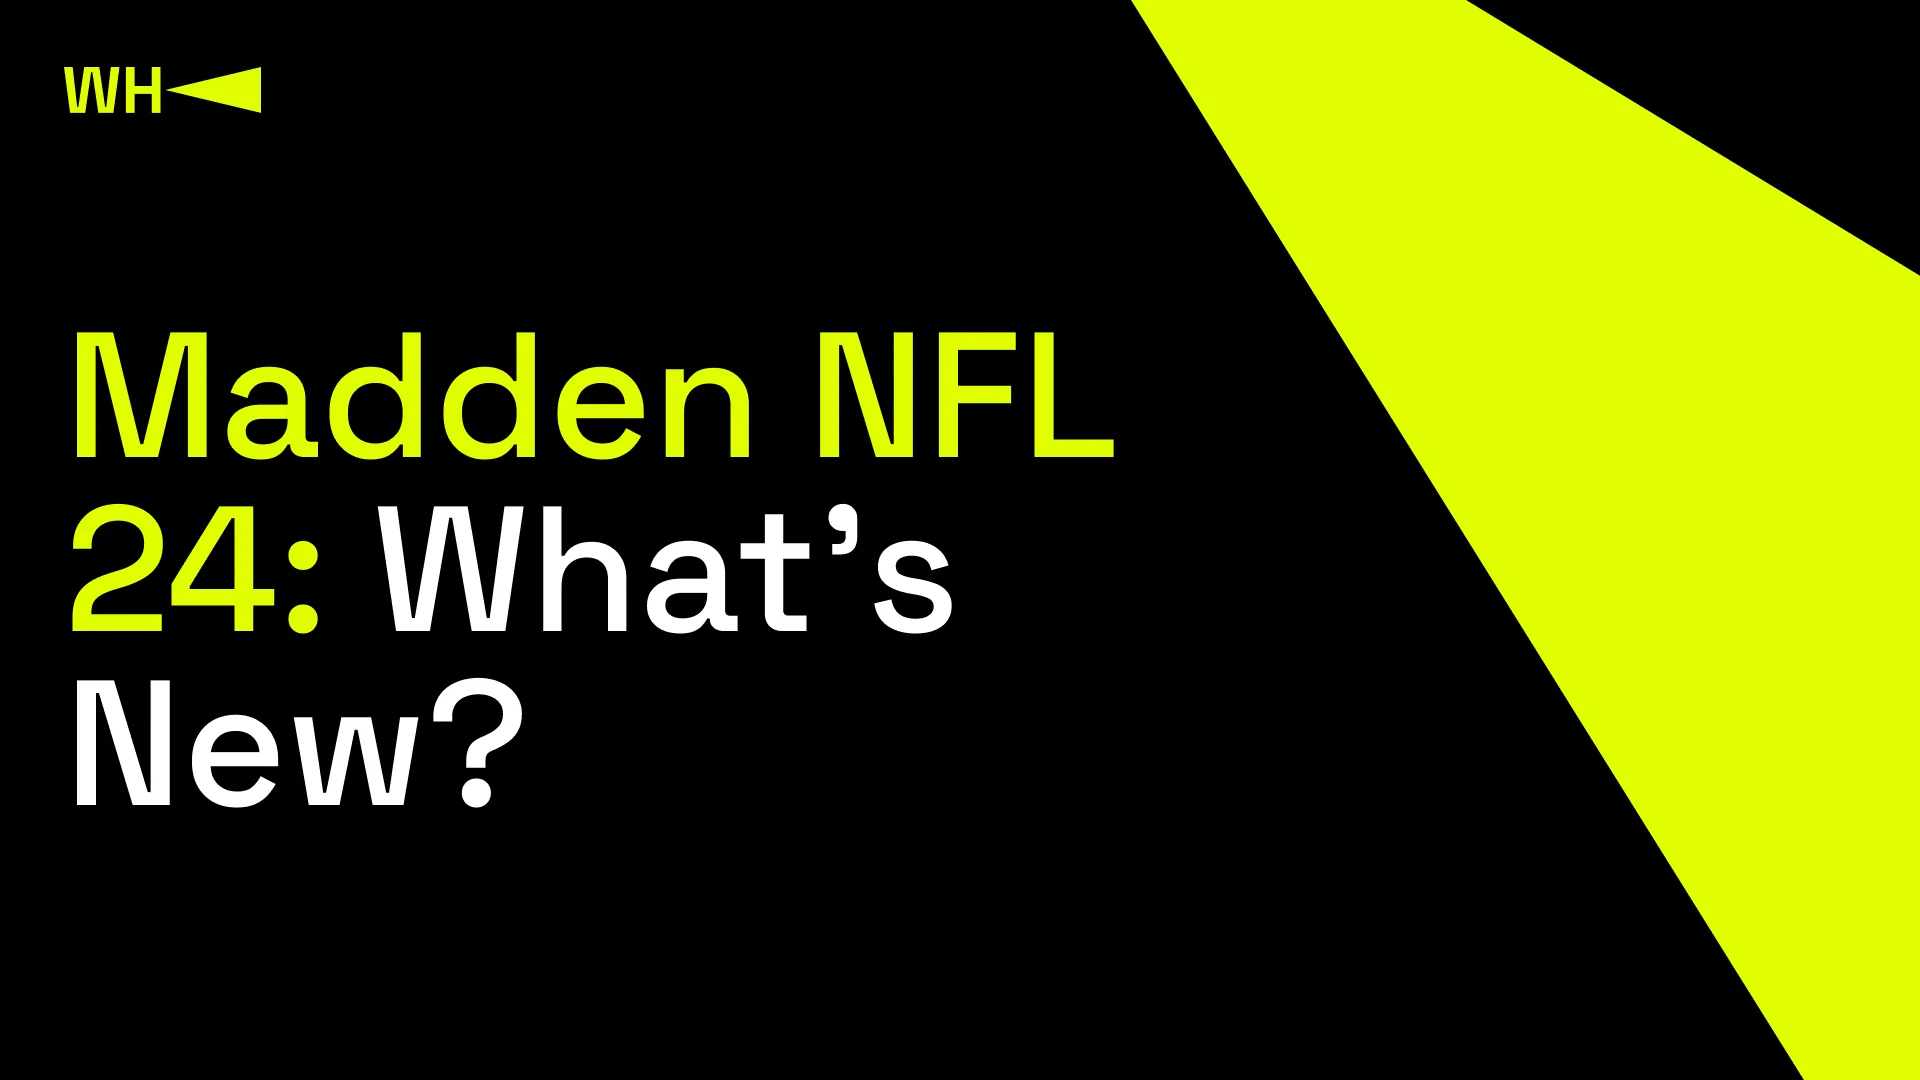 Madden NFL 24: What’s New?